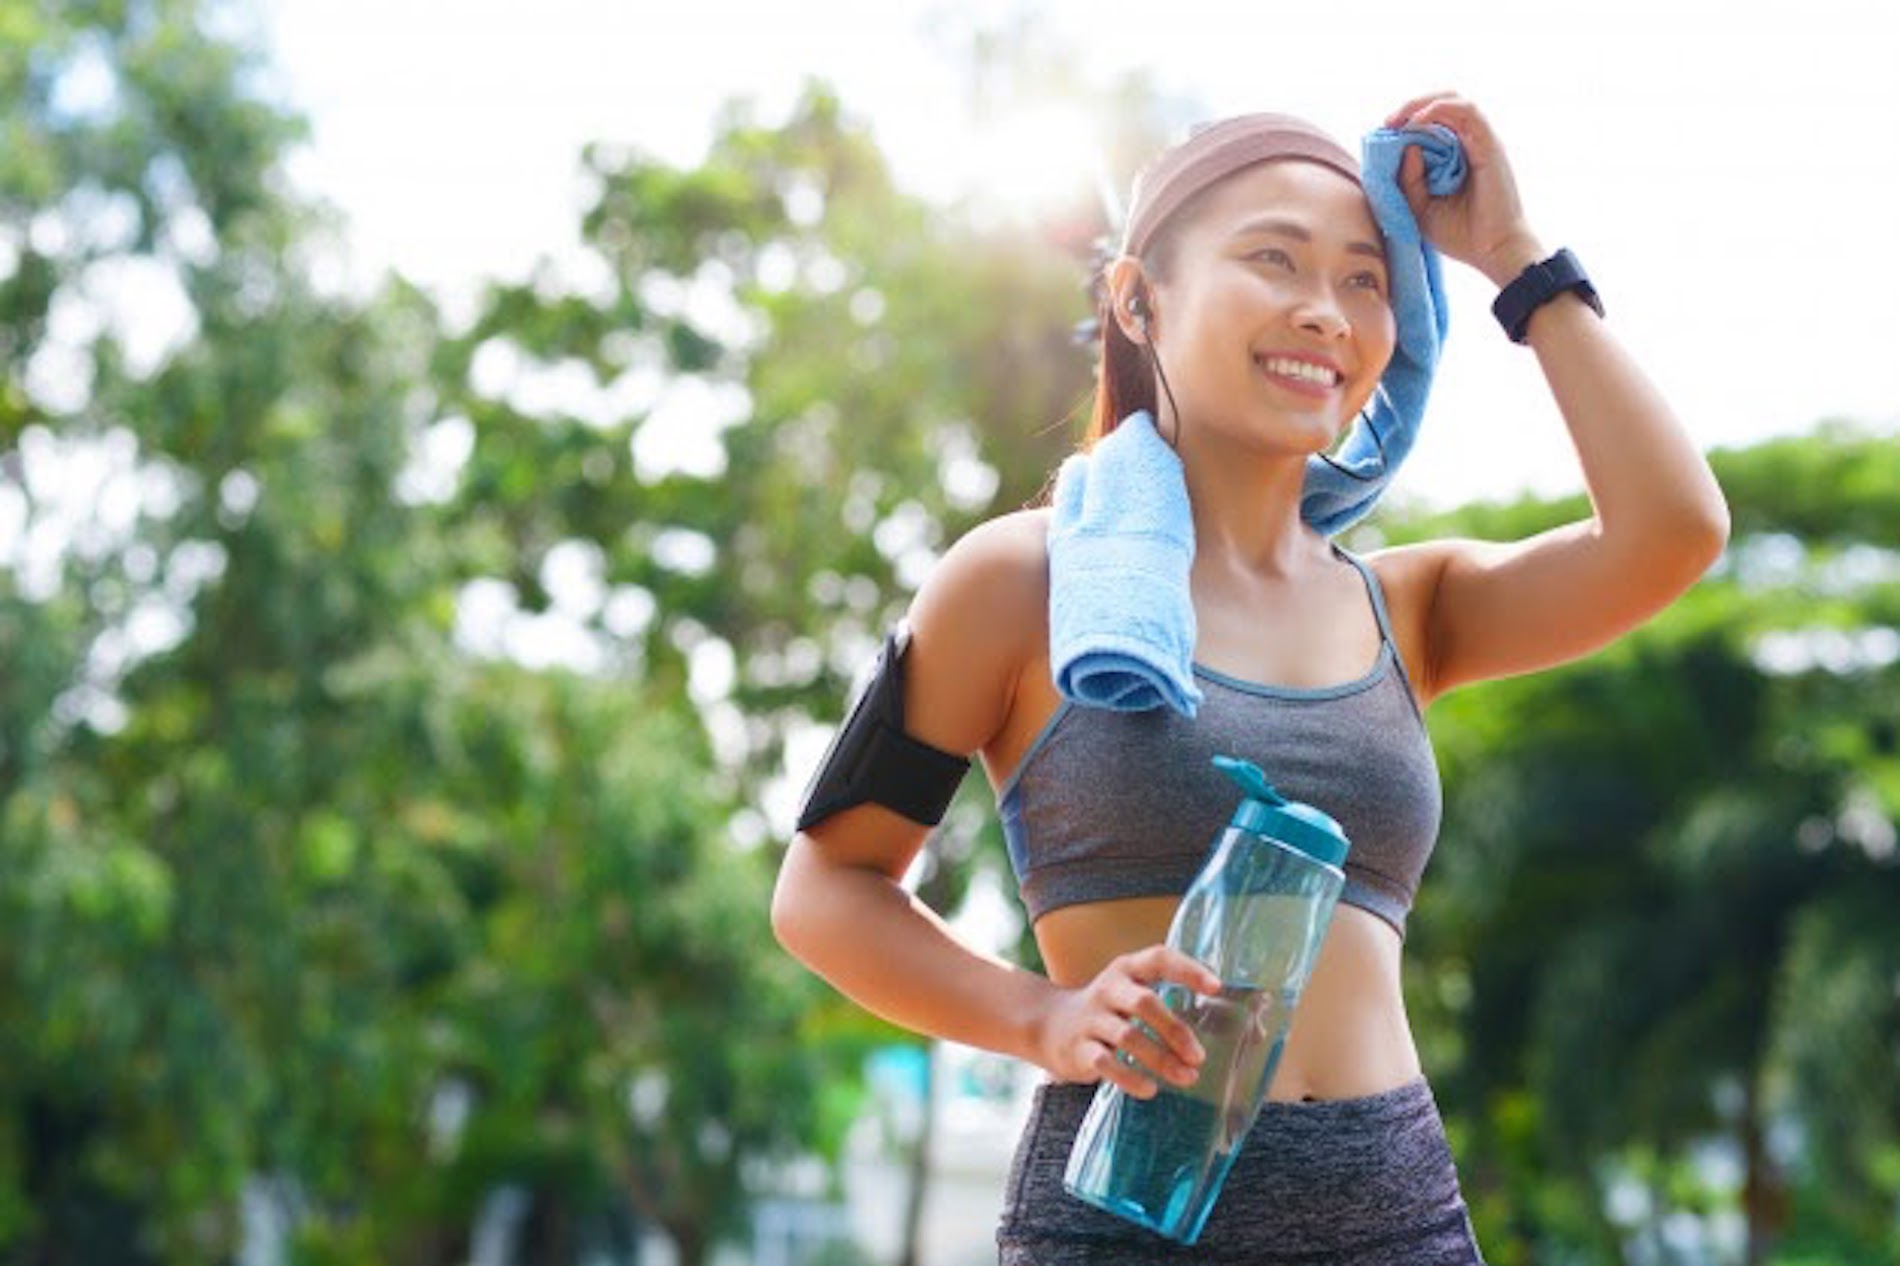 How to take care of your skin when you work out